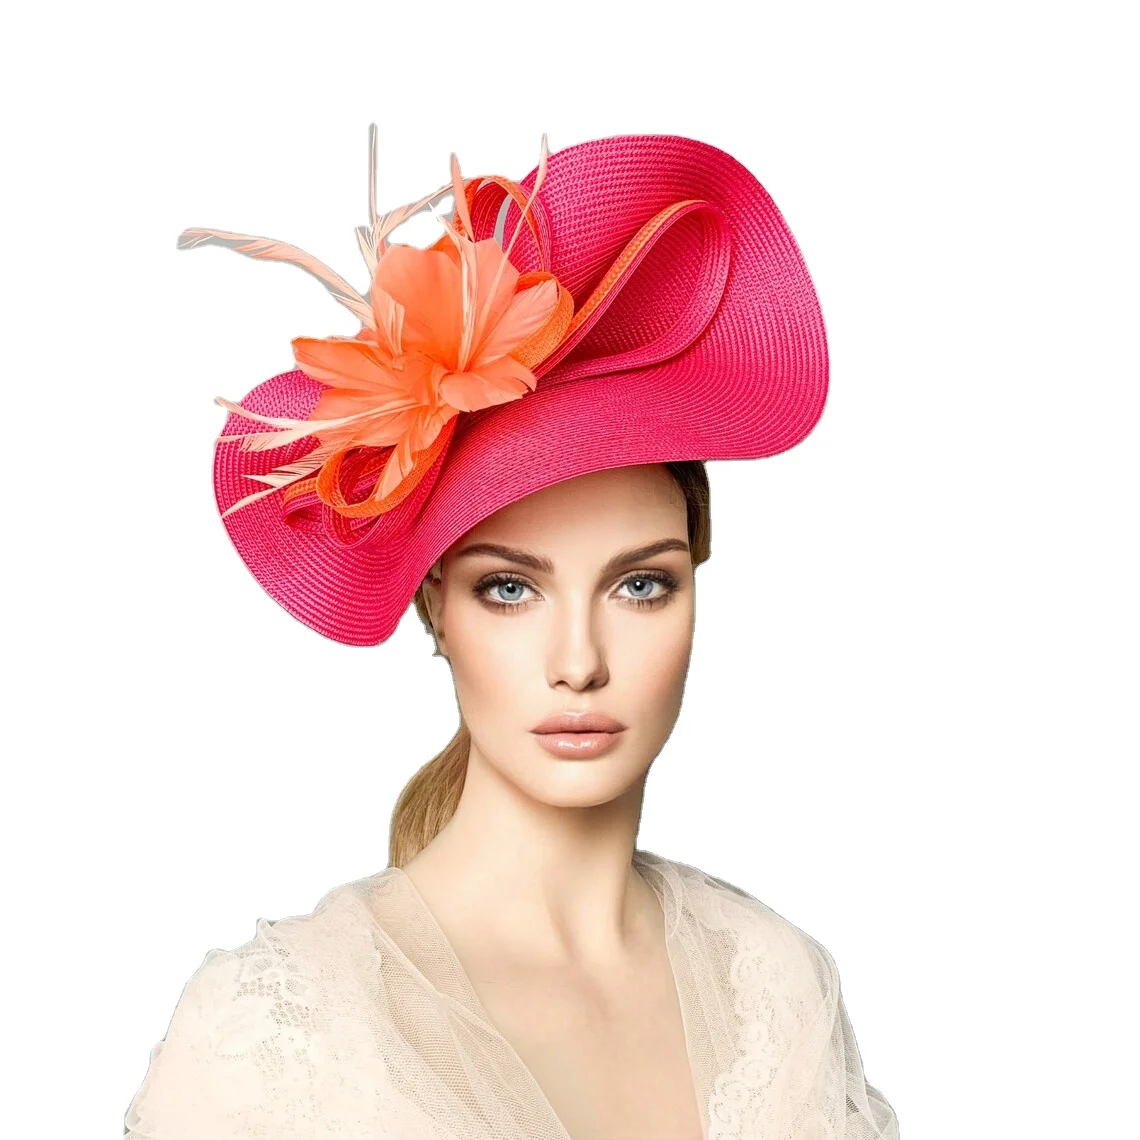 

Newest Red Hawaiian Fascinators Hats Fashion Straw Church Hat Wedding Theme Party Derby Hat Millinery for Women ladies